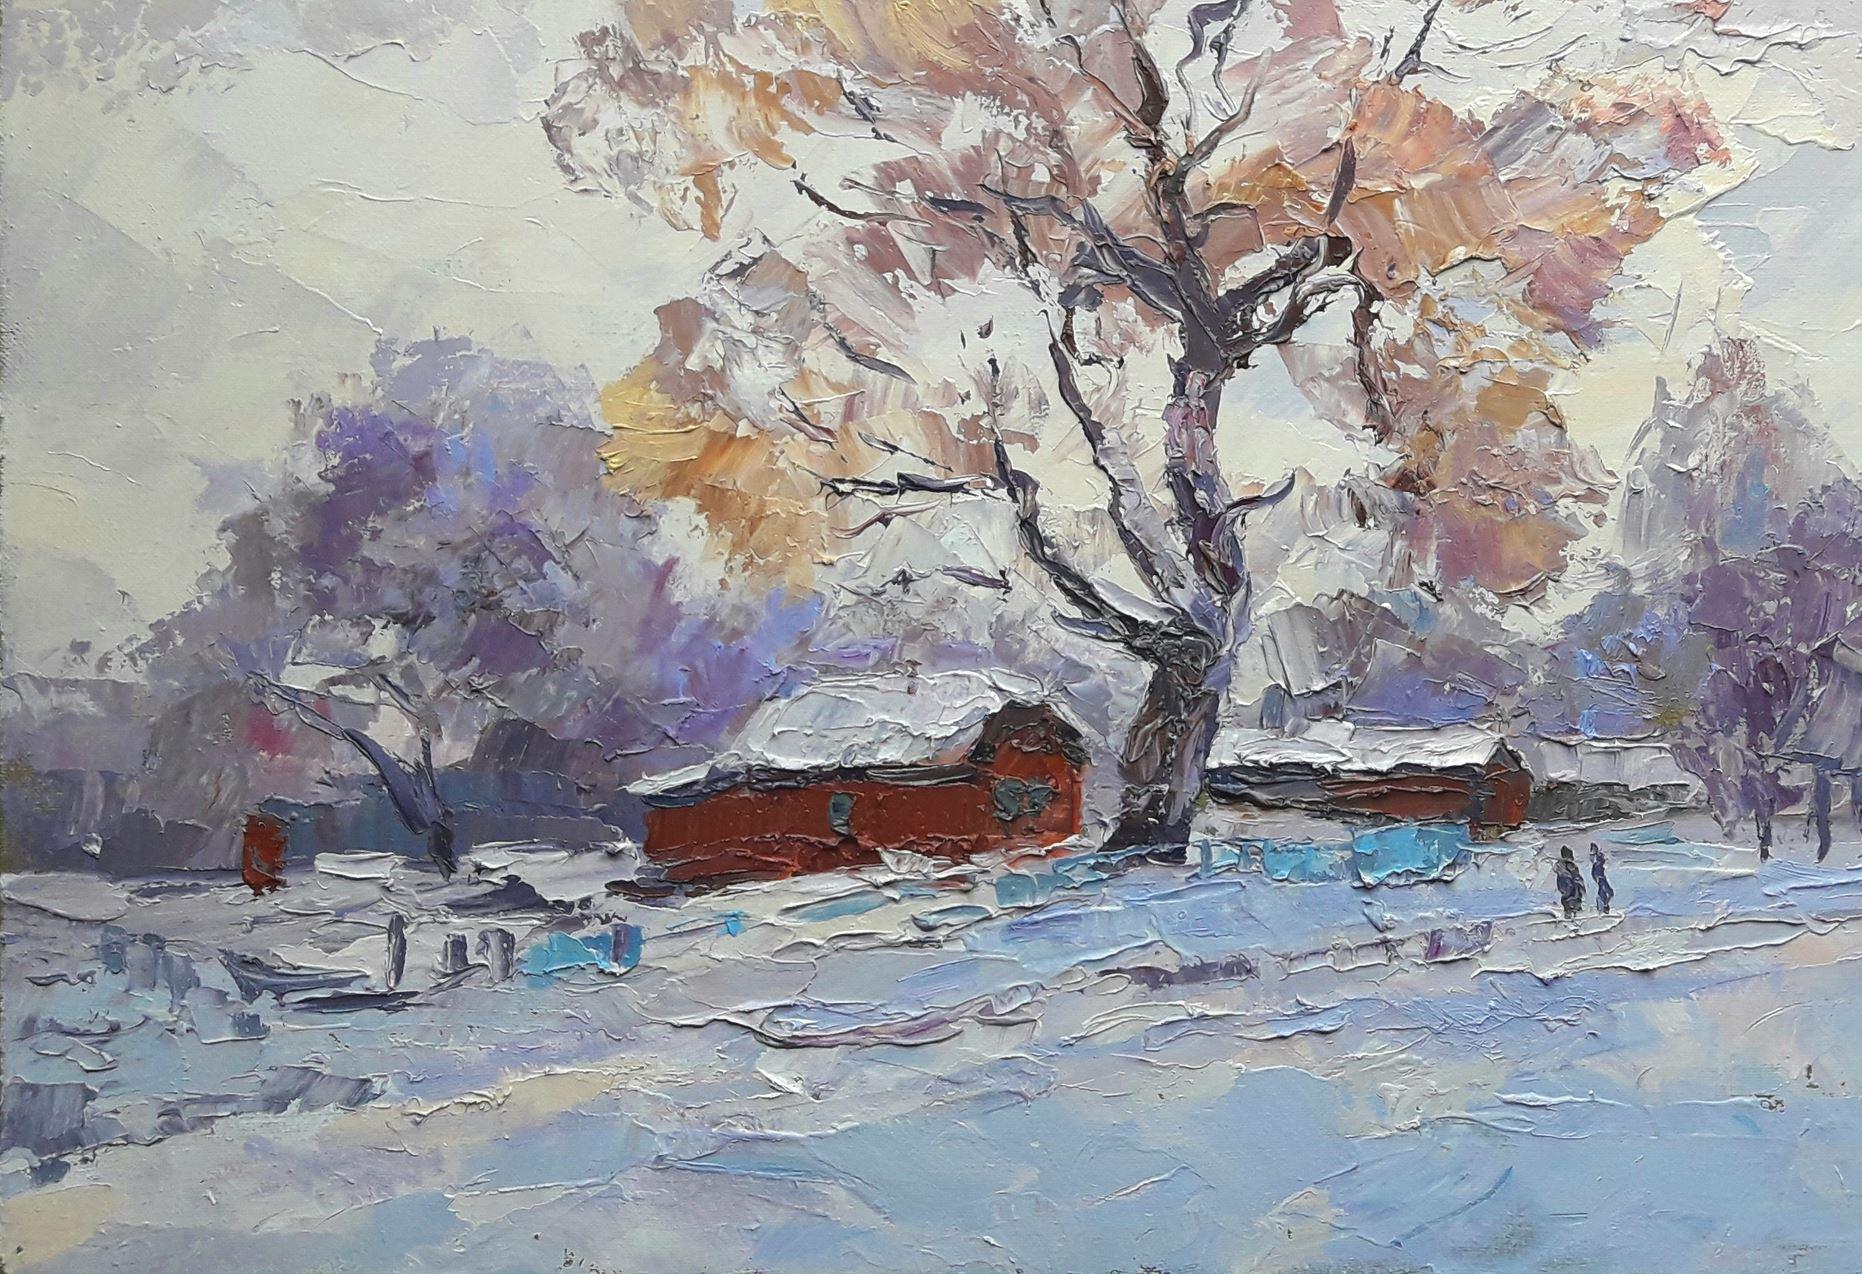 Artist: Boris Serdyuk 
Work: Original oil painting, handmade artwork, one of a kind 
Medium: Oil on Canvas
Style: Impressionism
Year: 2020
Title: Somewhere in the mountains
Size: 17.5